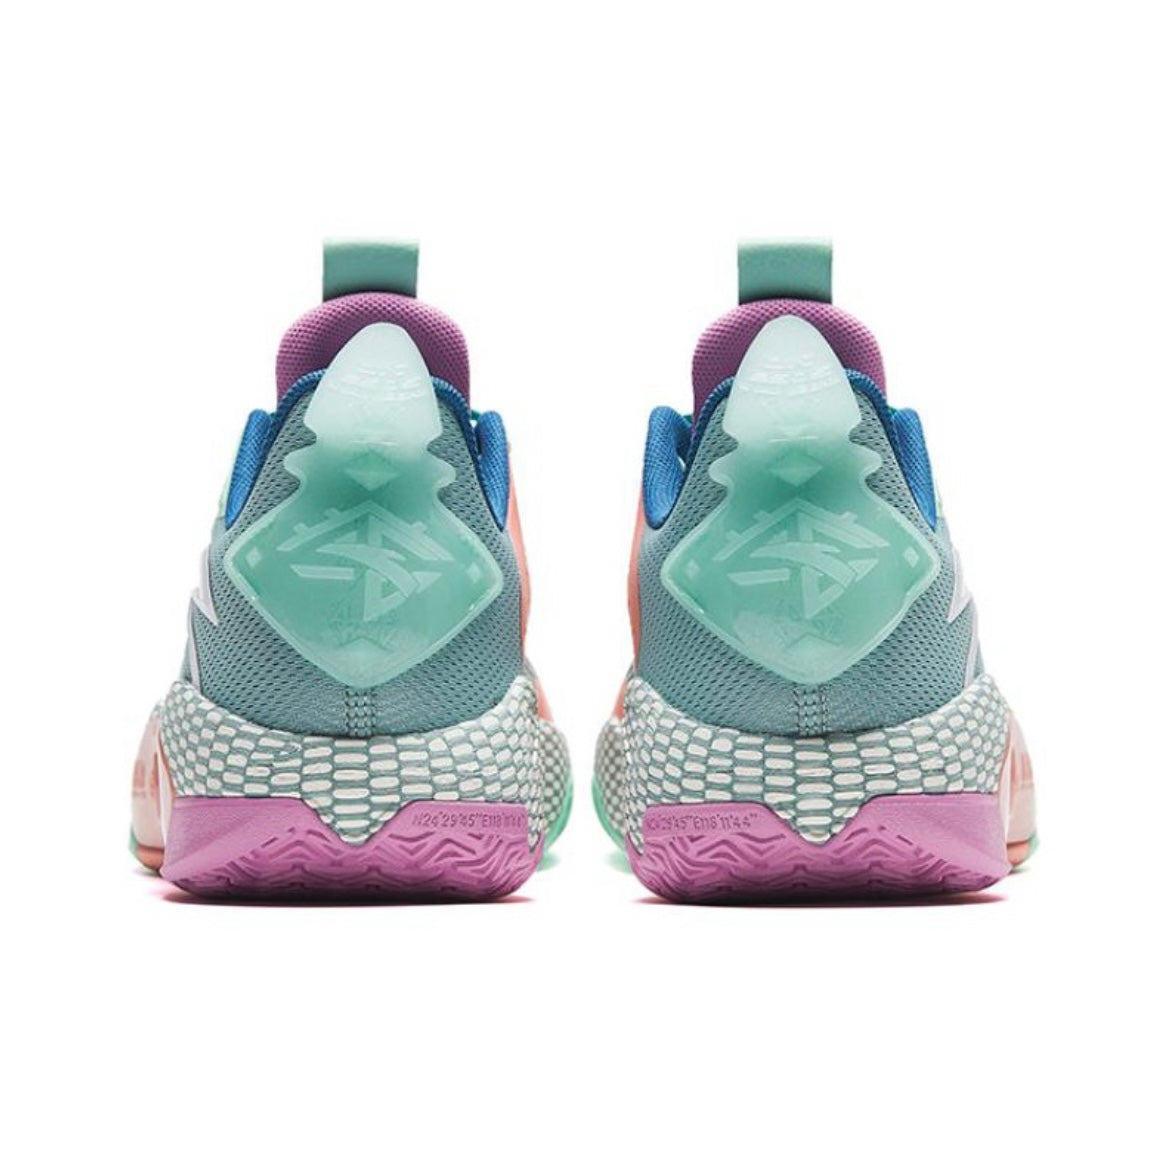 Kyrie Irving x Anta Shock Wave 5 TD – Madhouse